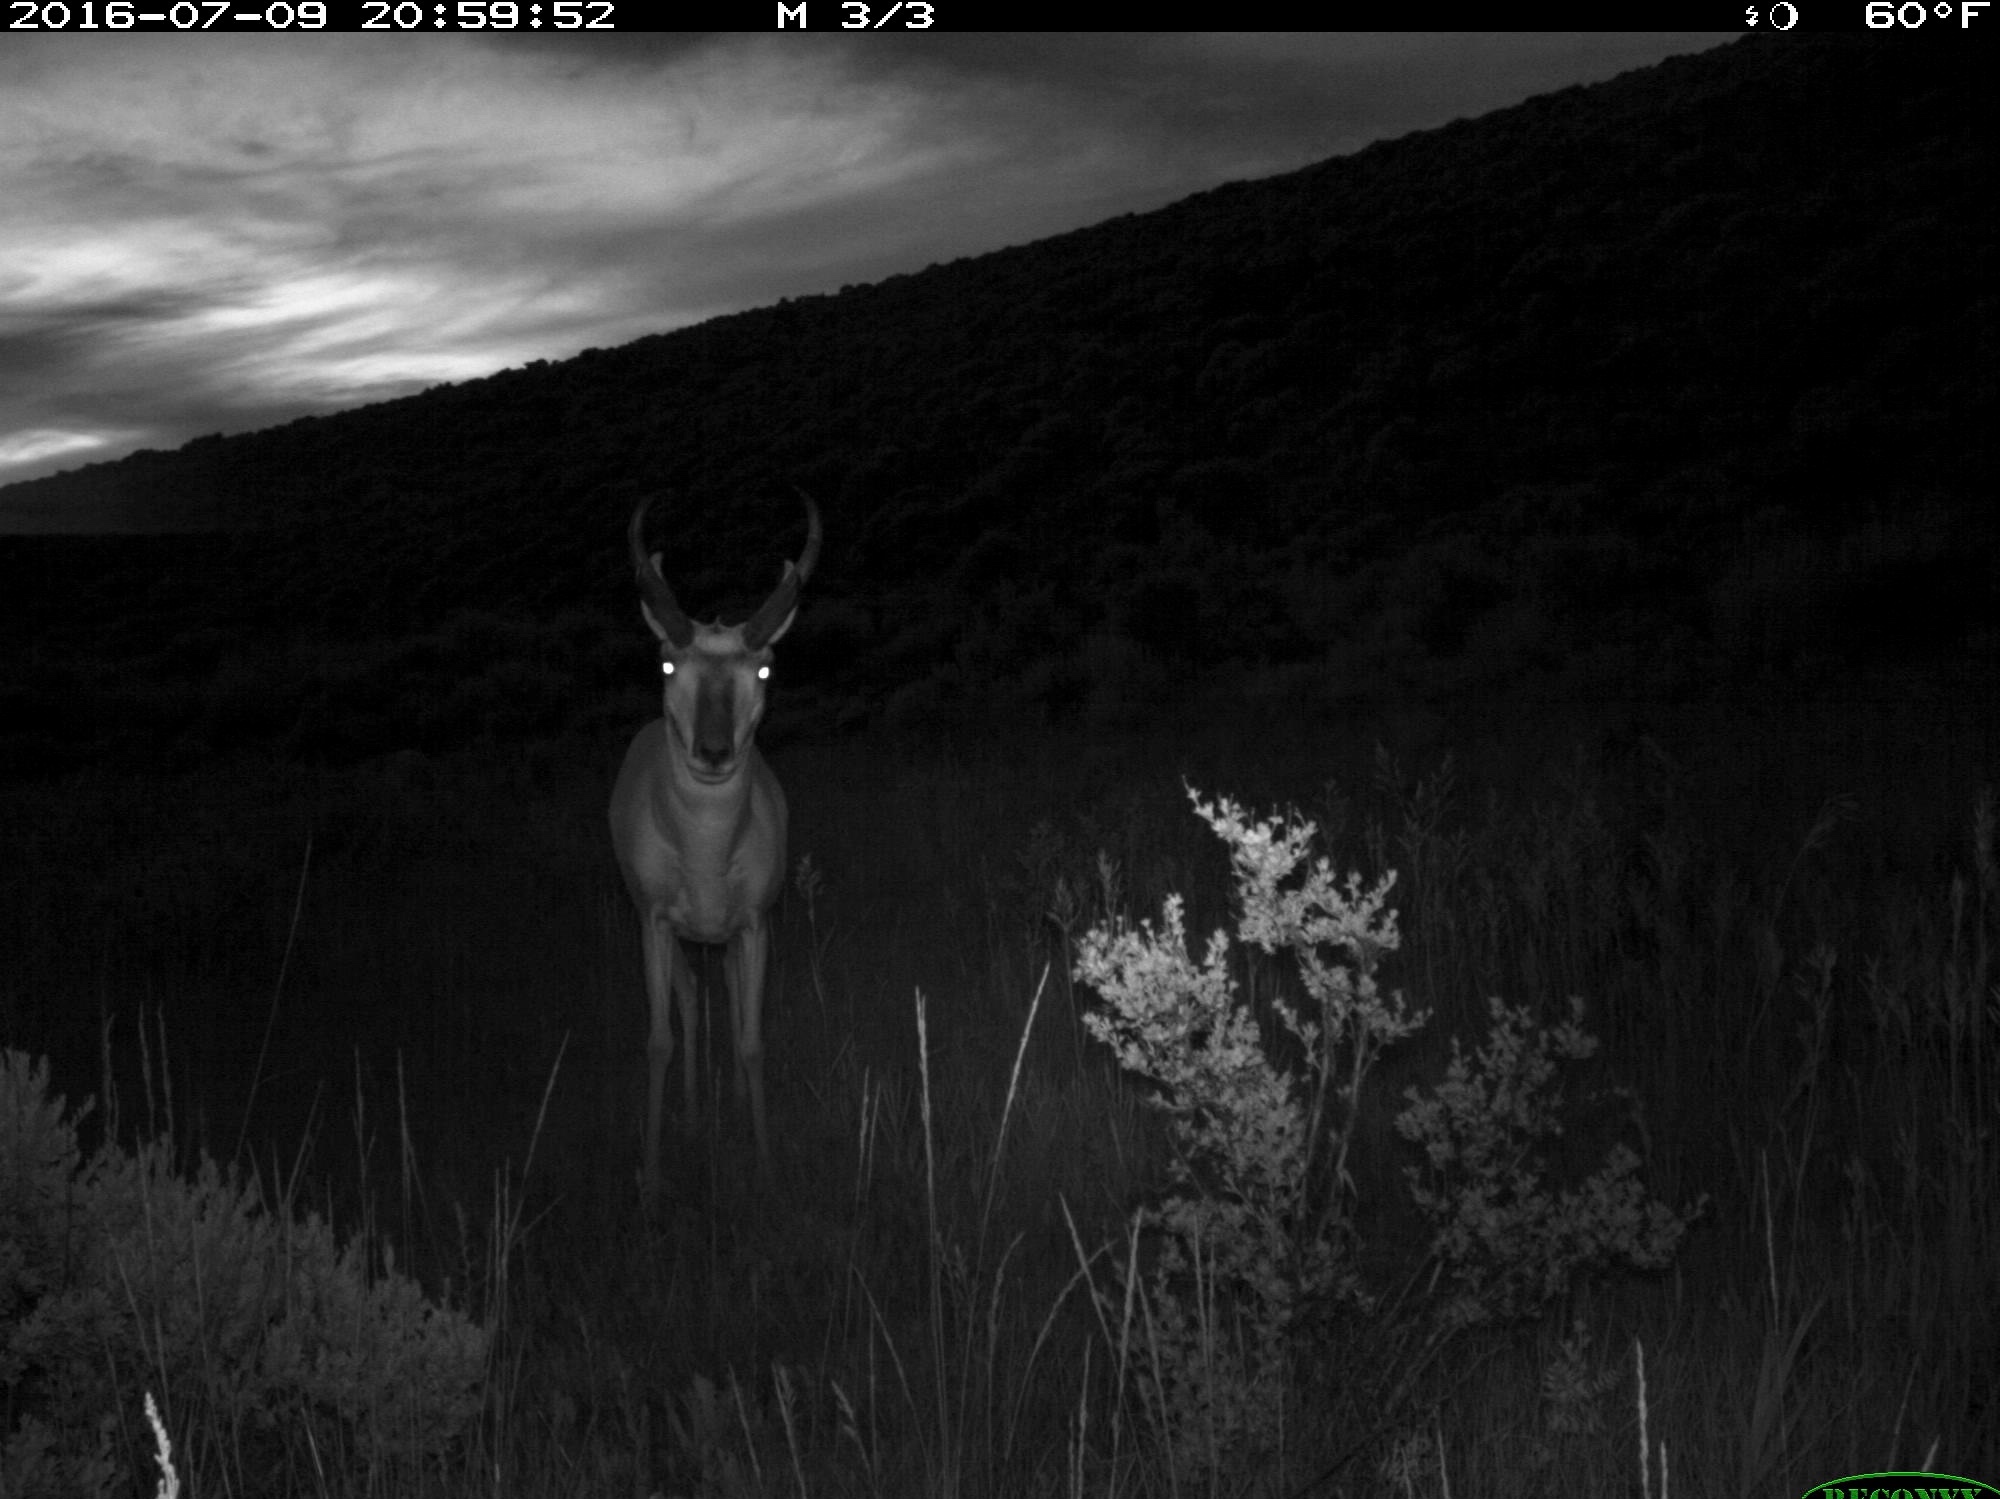 A pronghorn antelope standing in a meadow is captured on a night time trail cam. Its eyes are illuminated from the flash.